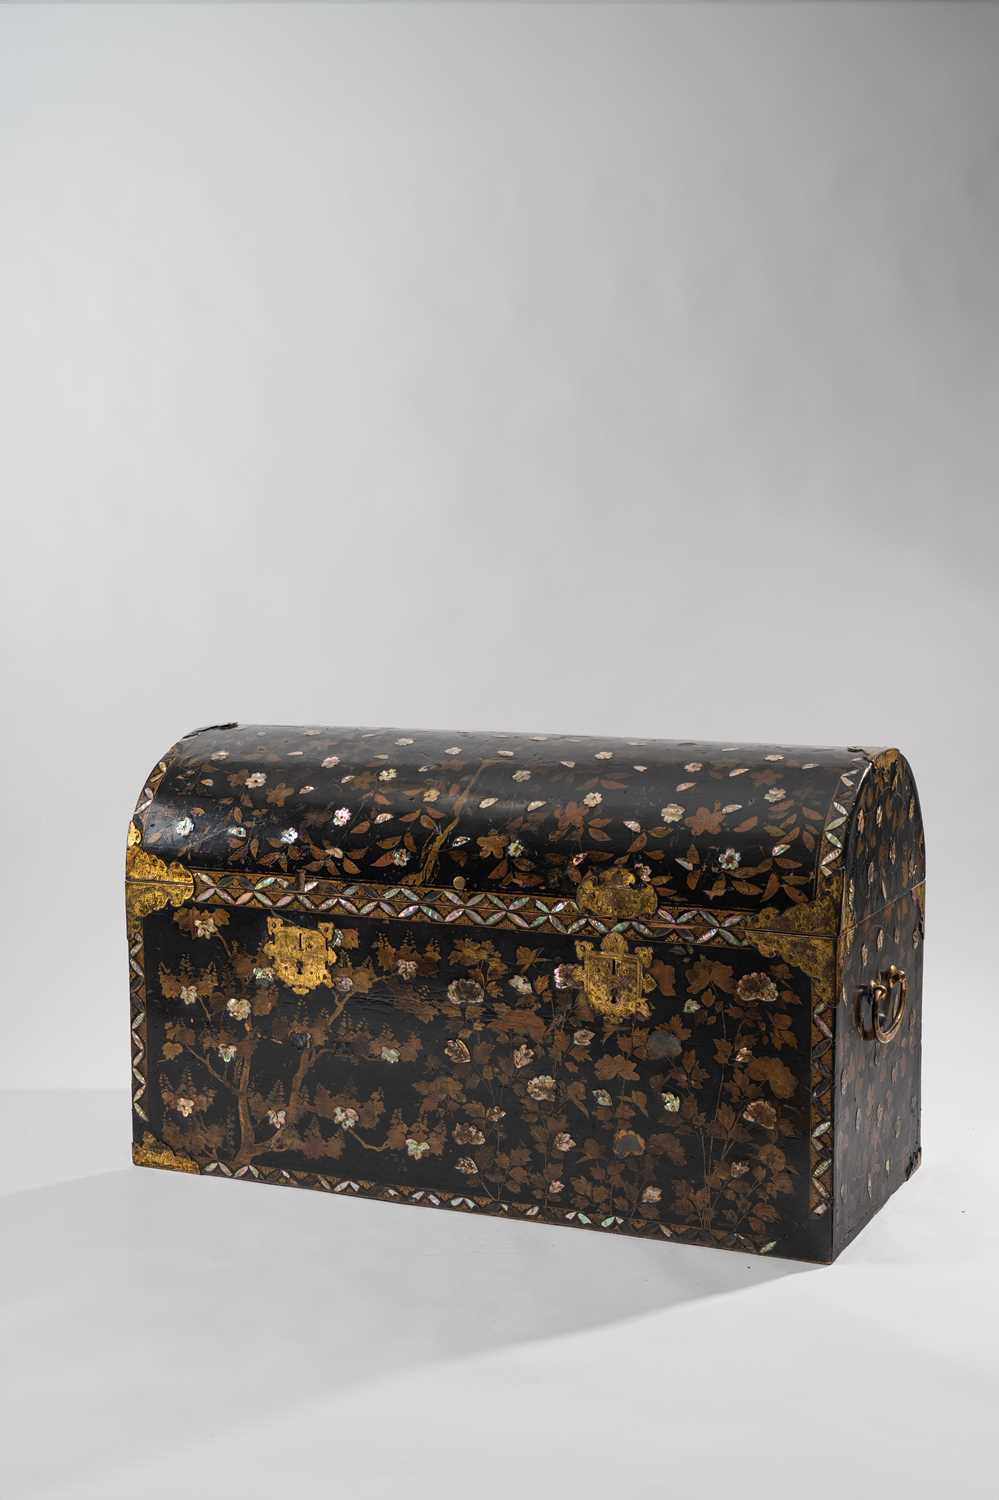 A LARGE JAPANESE GOLD AND BLACK LACQUER NANBAN COFFER MOMOYAMA PERIOD, 16TH CENTURY Of typical